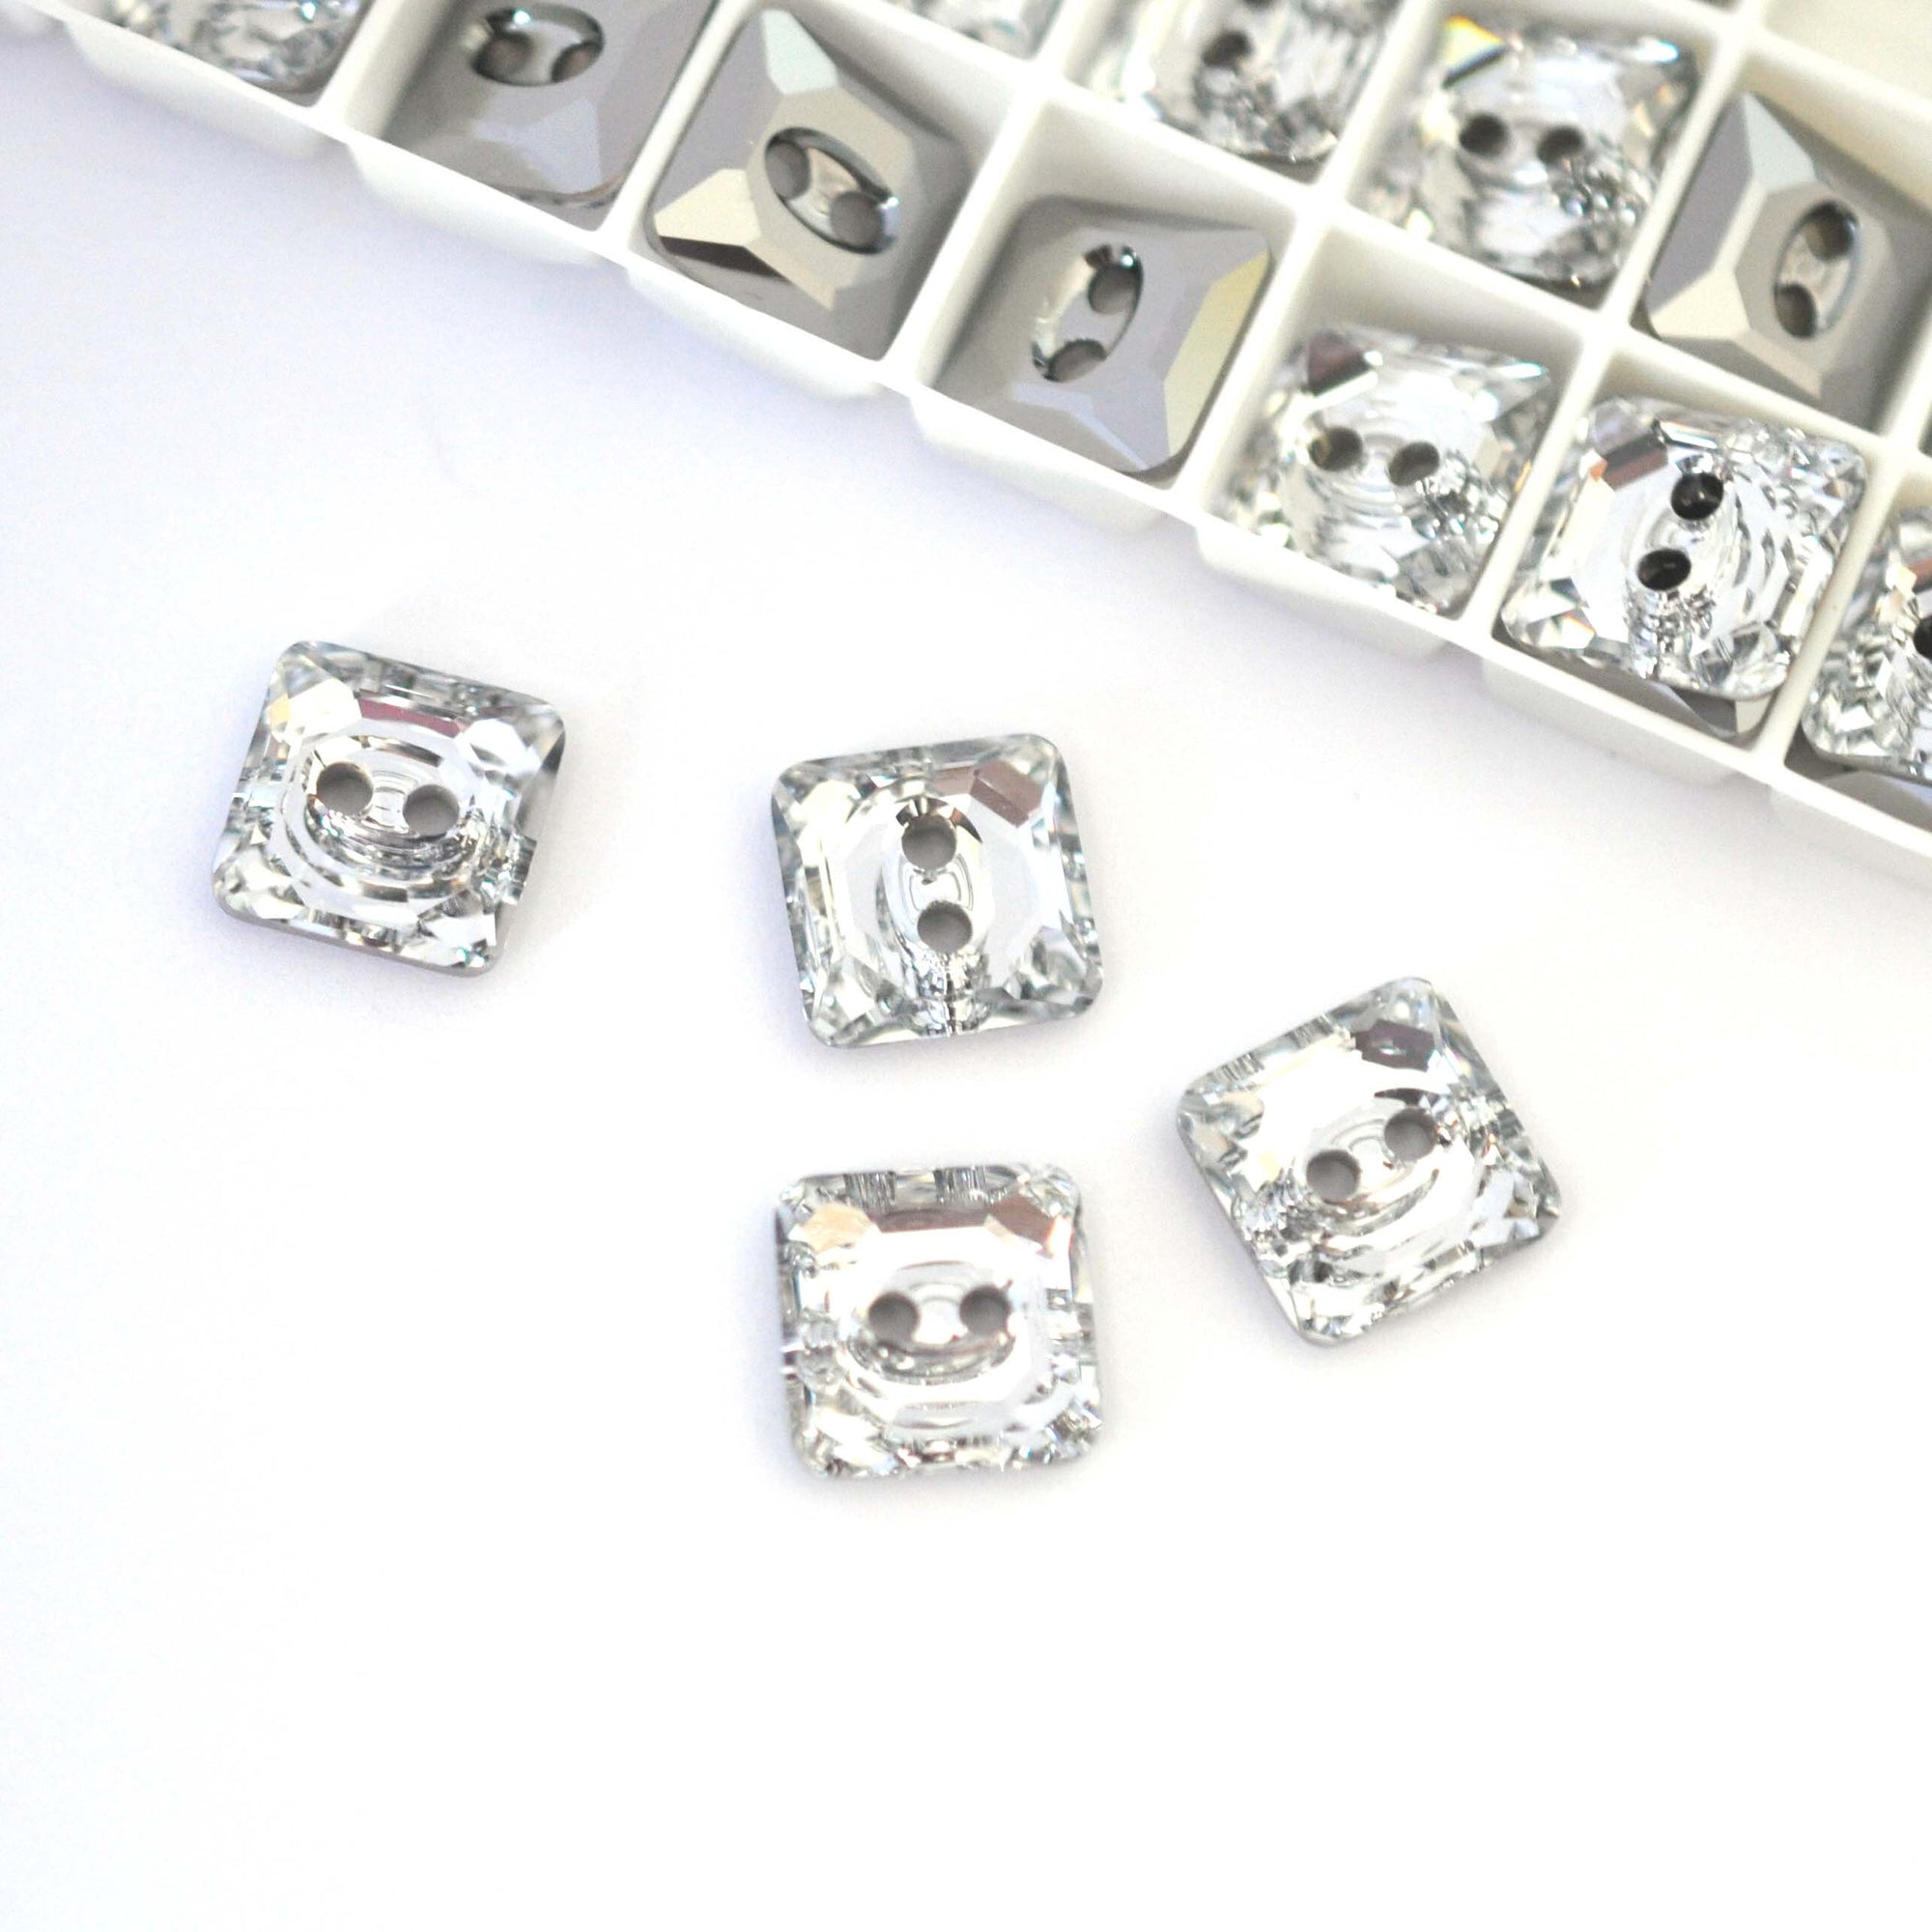 Crystal Clear Square Crystal Buttons 3017 Barton Crystal 10mm